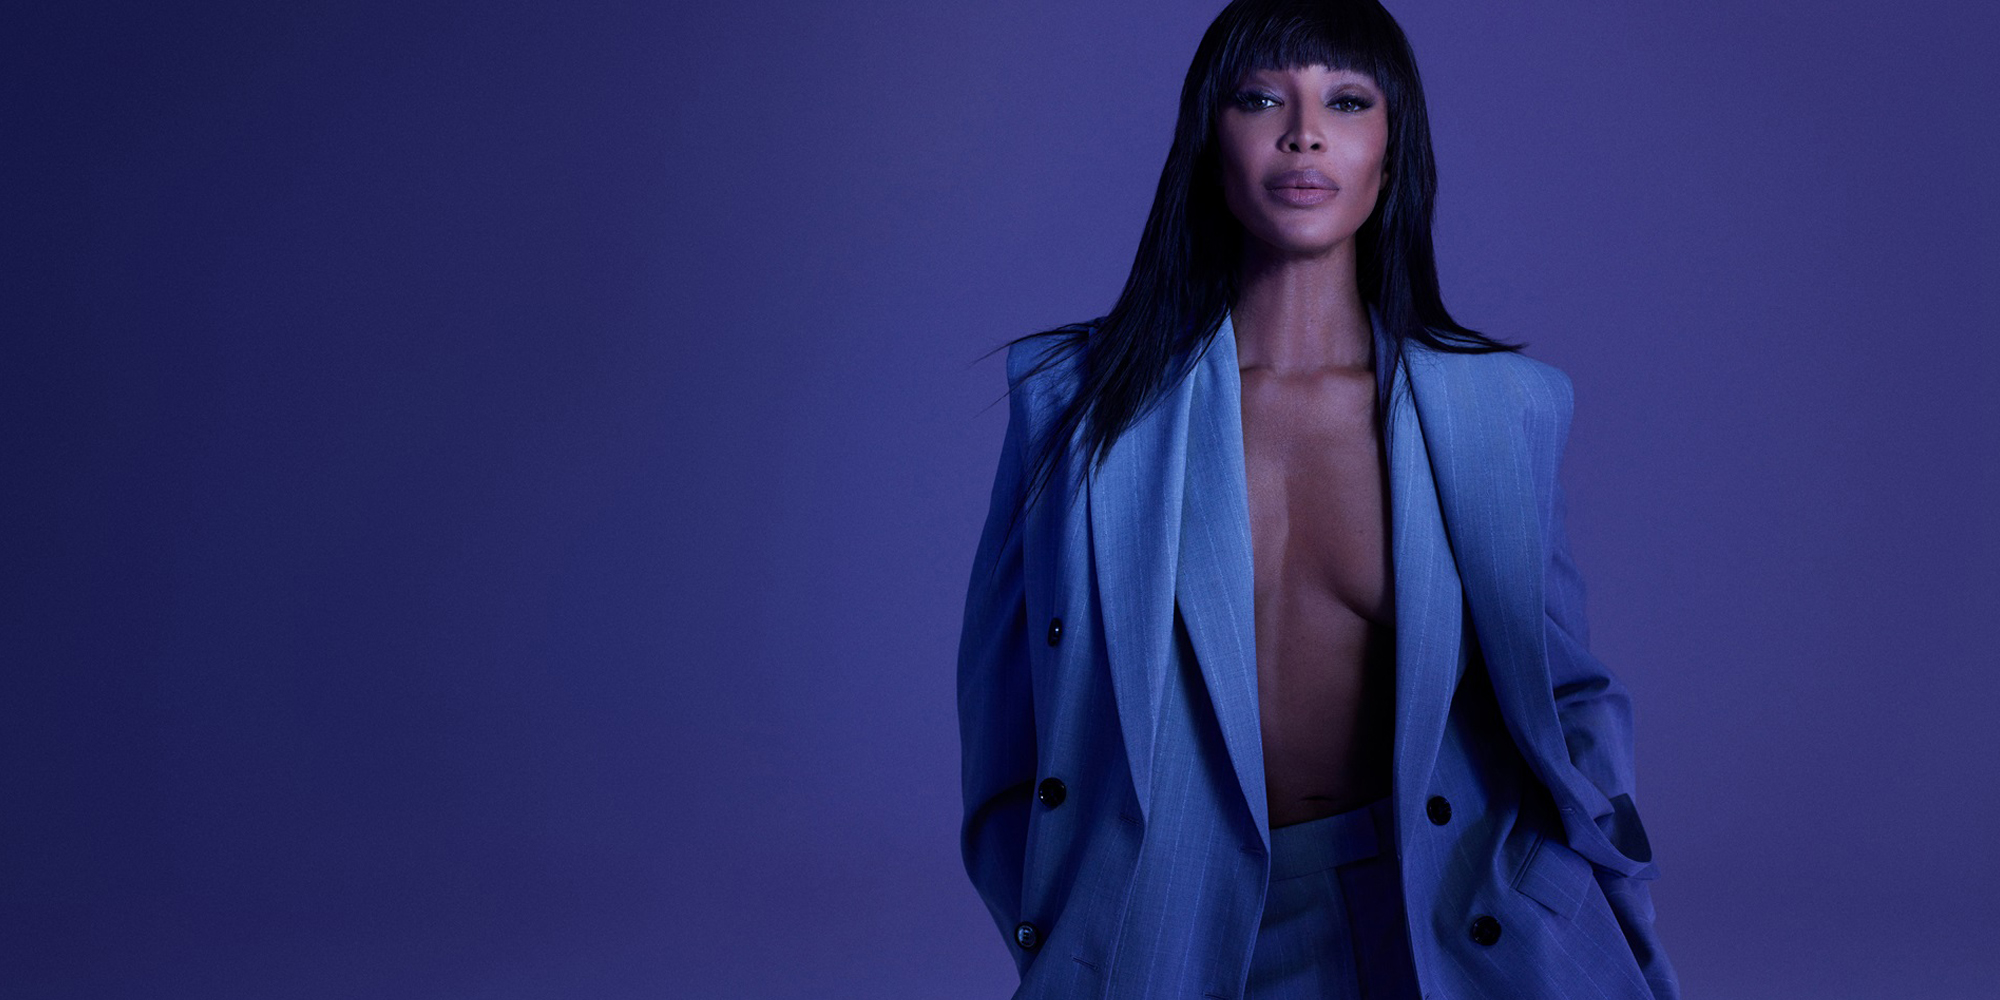 BOSS X NAOMI CAMPBELL CAPSULE COLLECTION